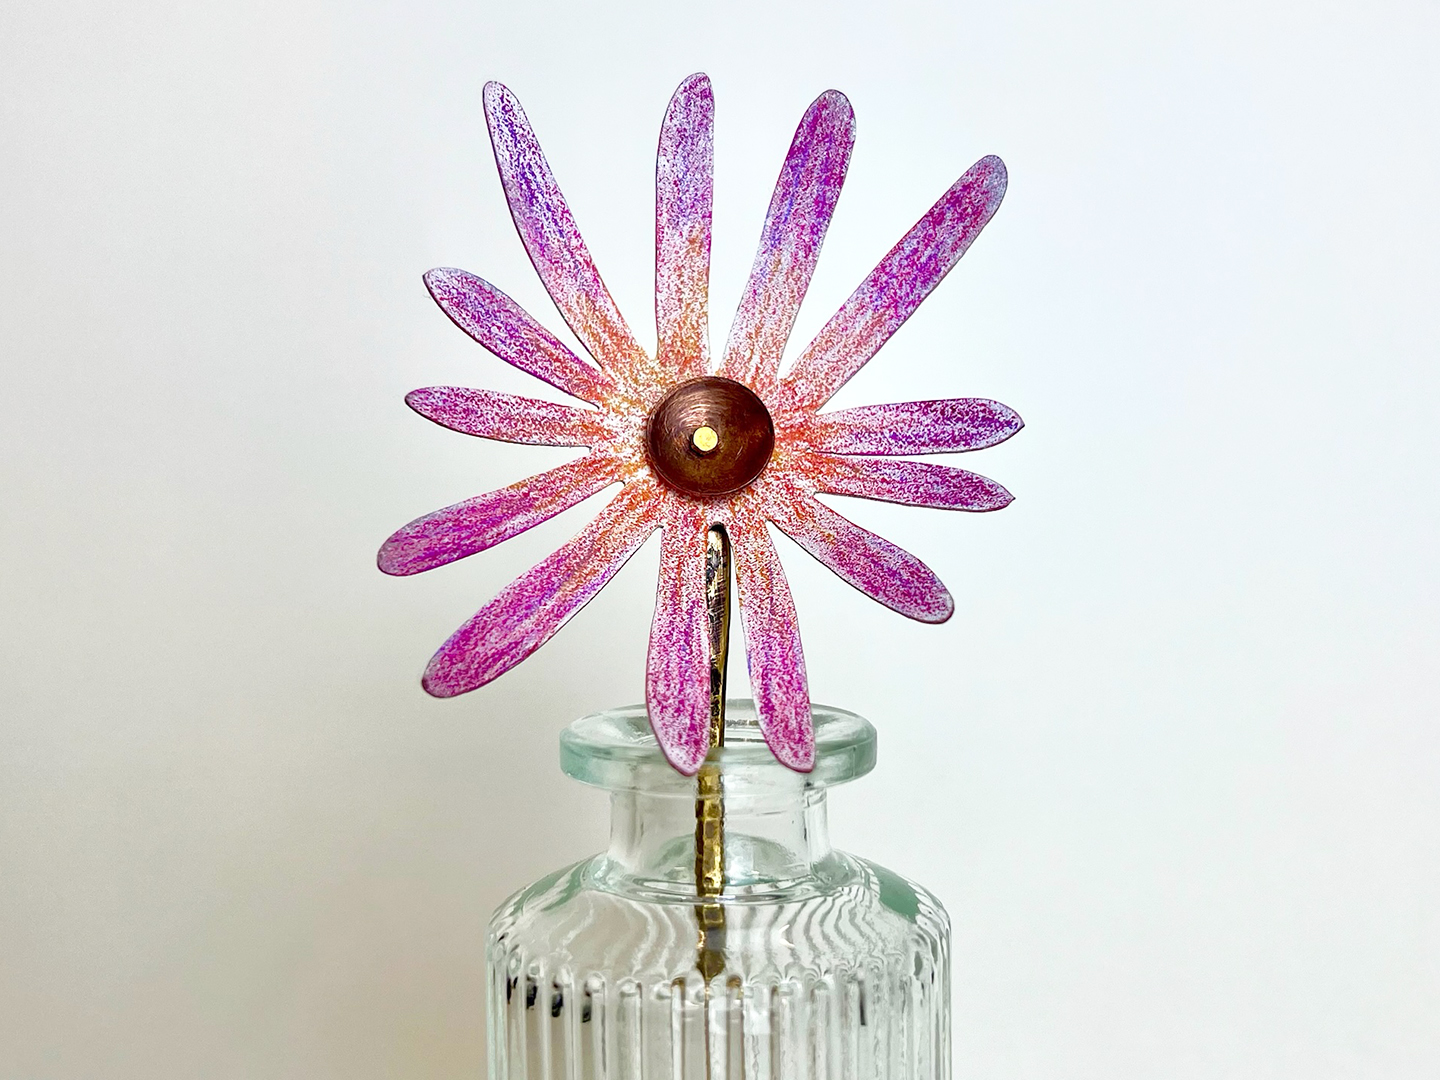 Photo of a metal flower with pink and purple petals sitting in a small glass vase.